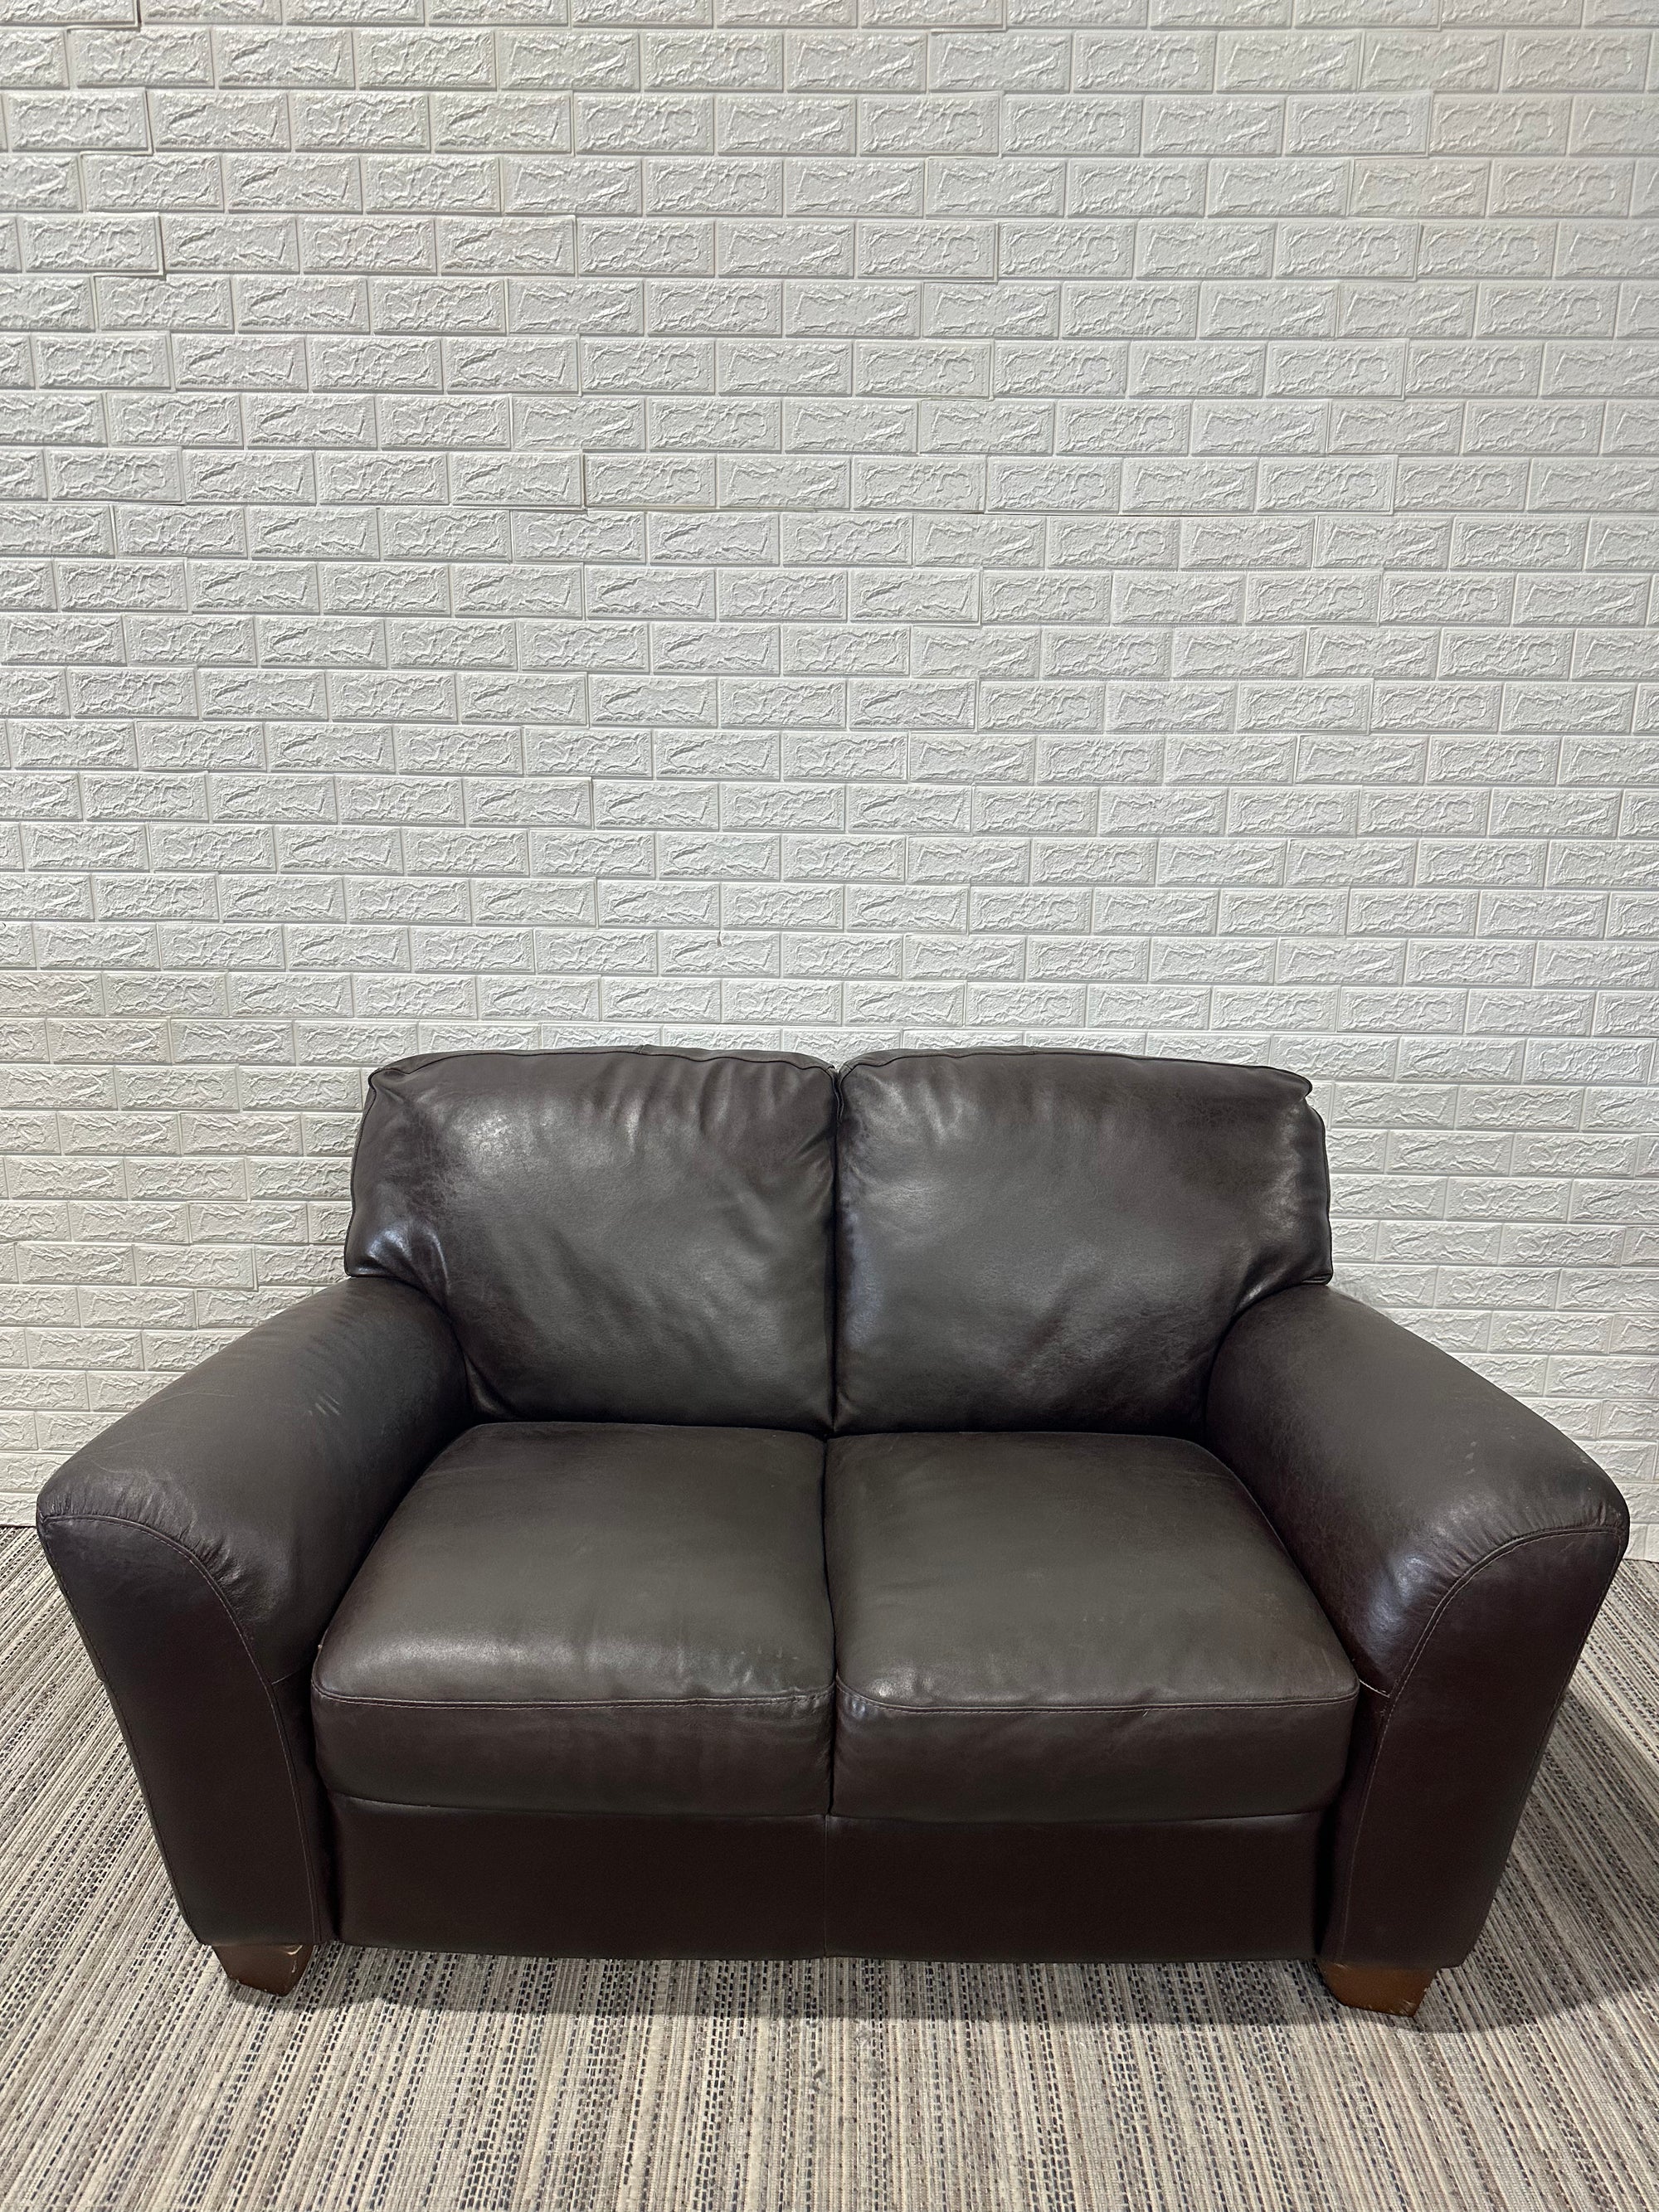 Pre-Owned Brown Leather Loveseat - Duckys Office Furniture